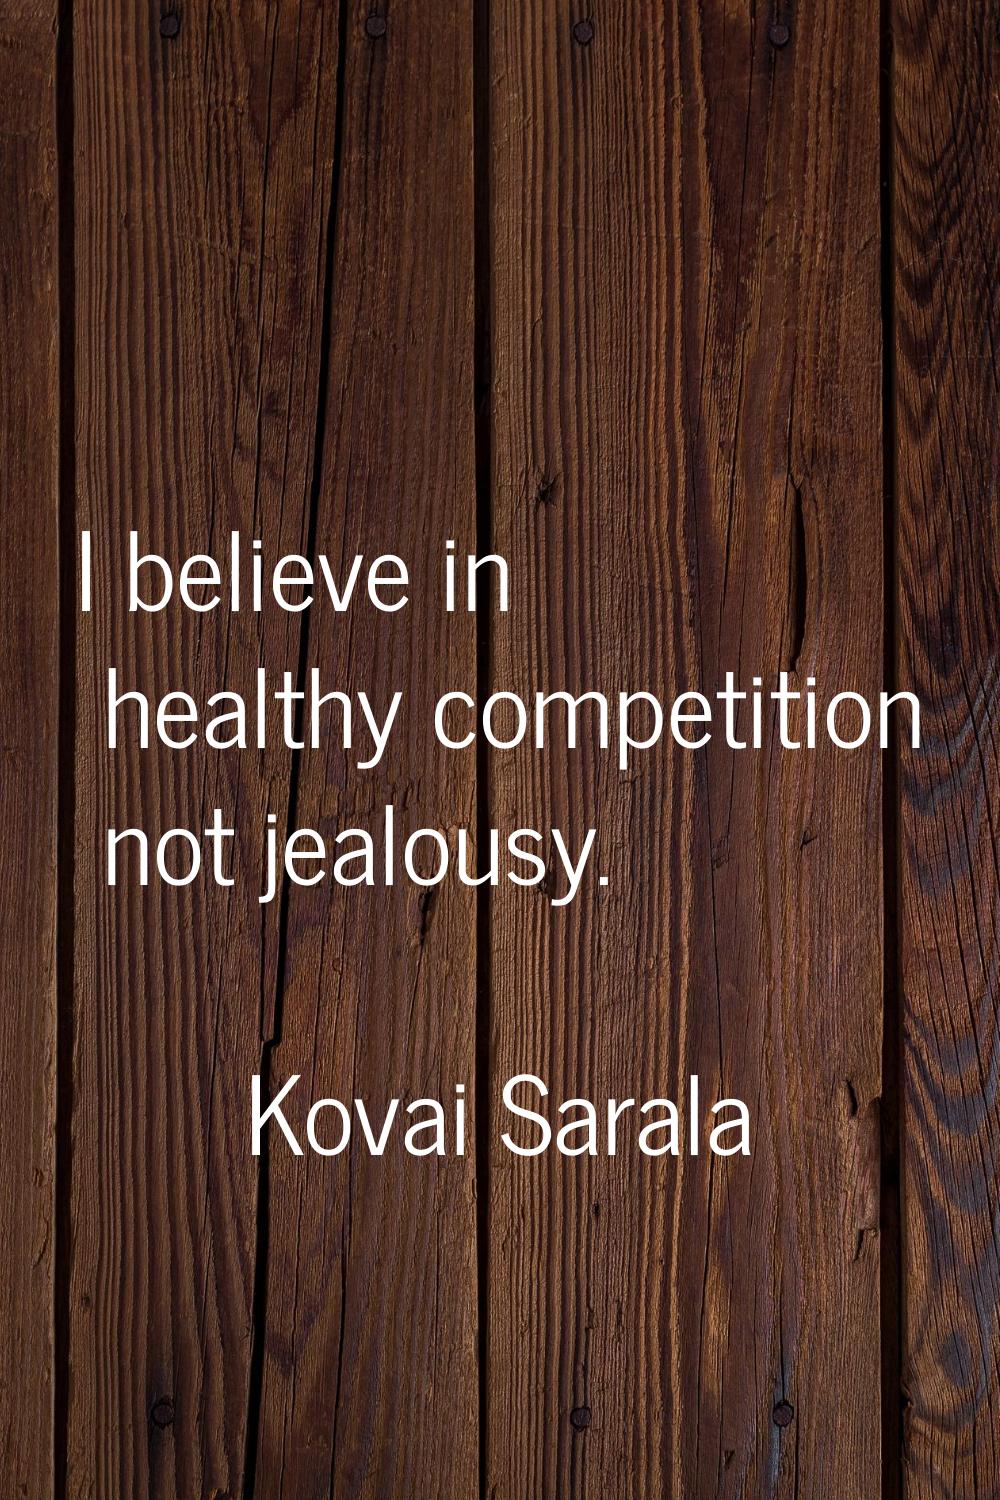 I believe in healthy competition not jealousy.